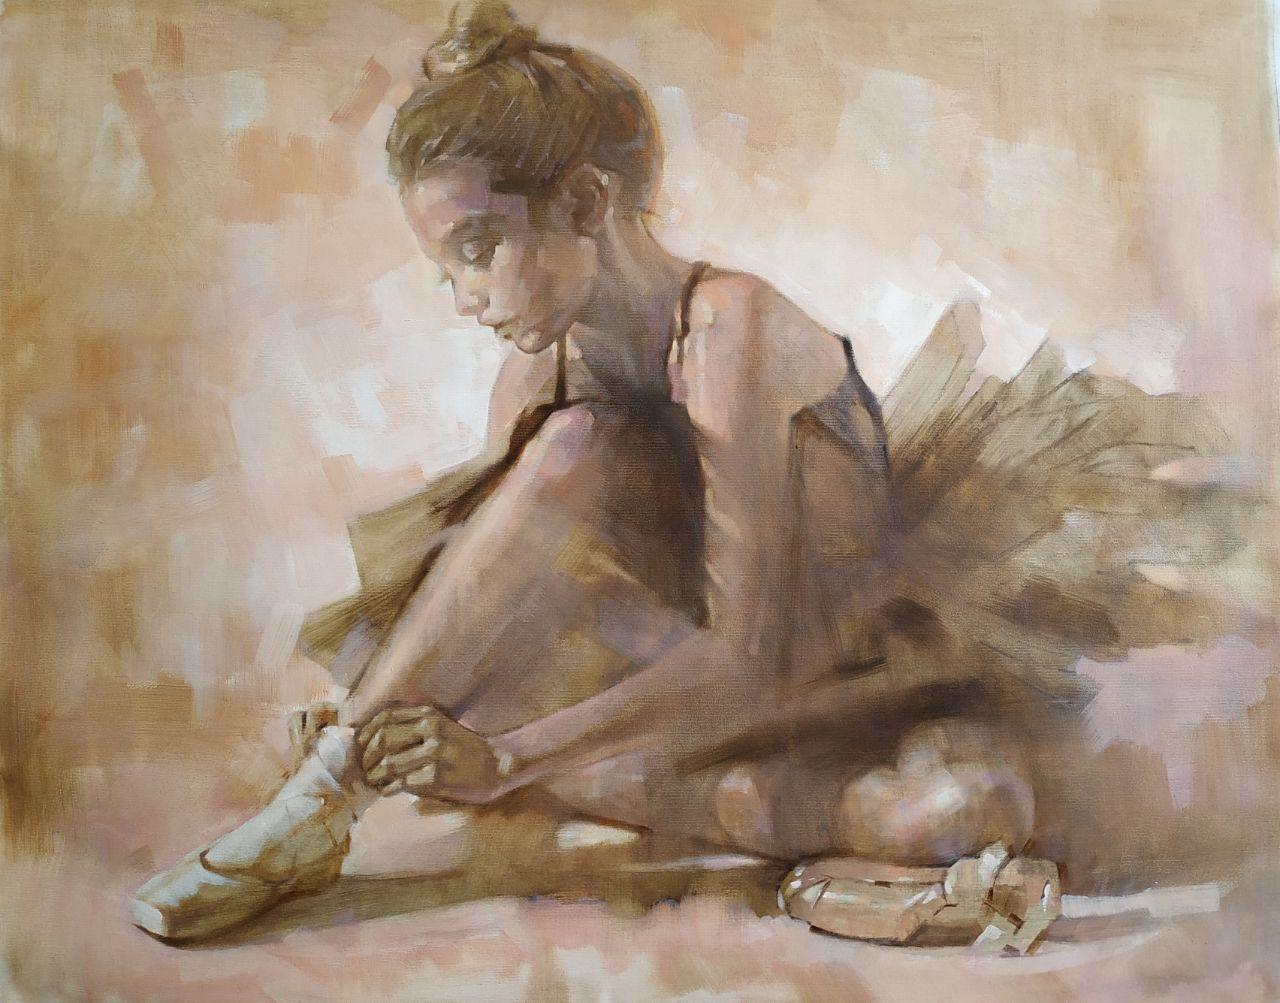 Artyom Abrahamyan Figurative Painting - Ballerina, Original Figurative Oil Painting, One of a Kind